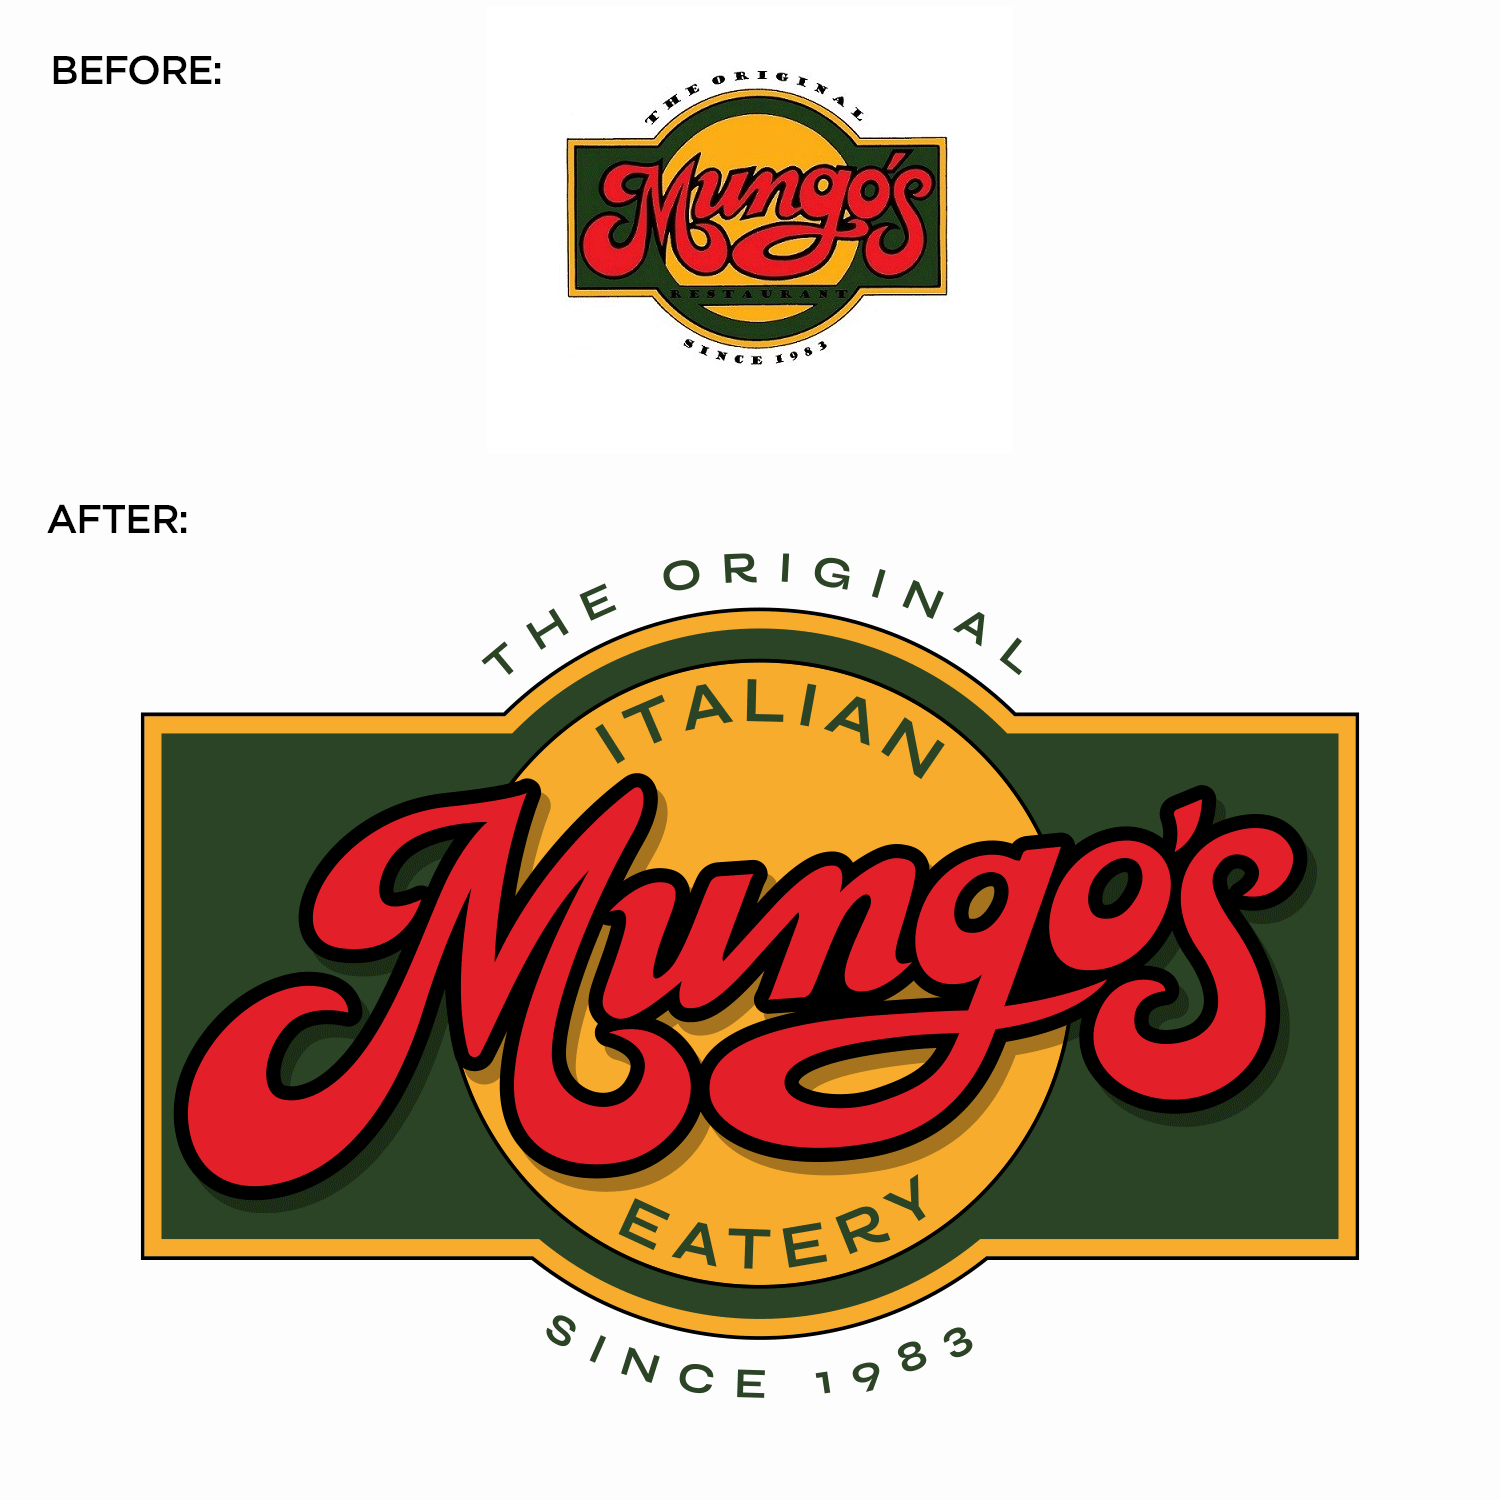 mungos logo before after 2